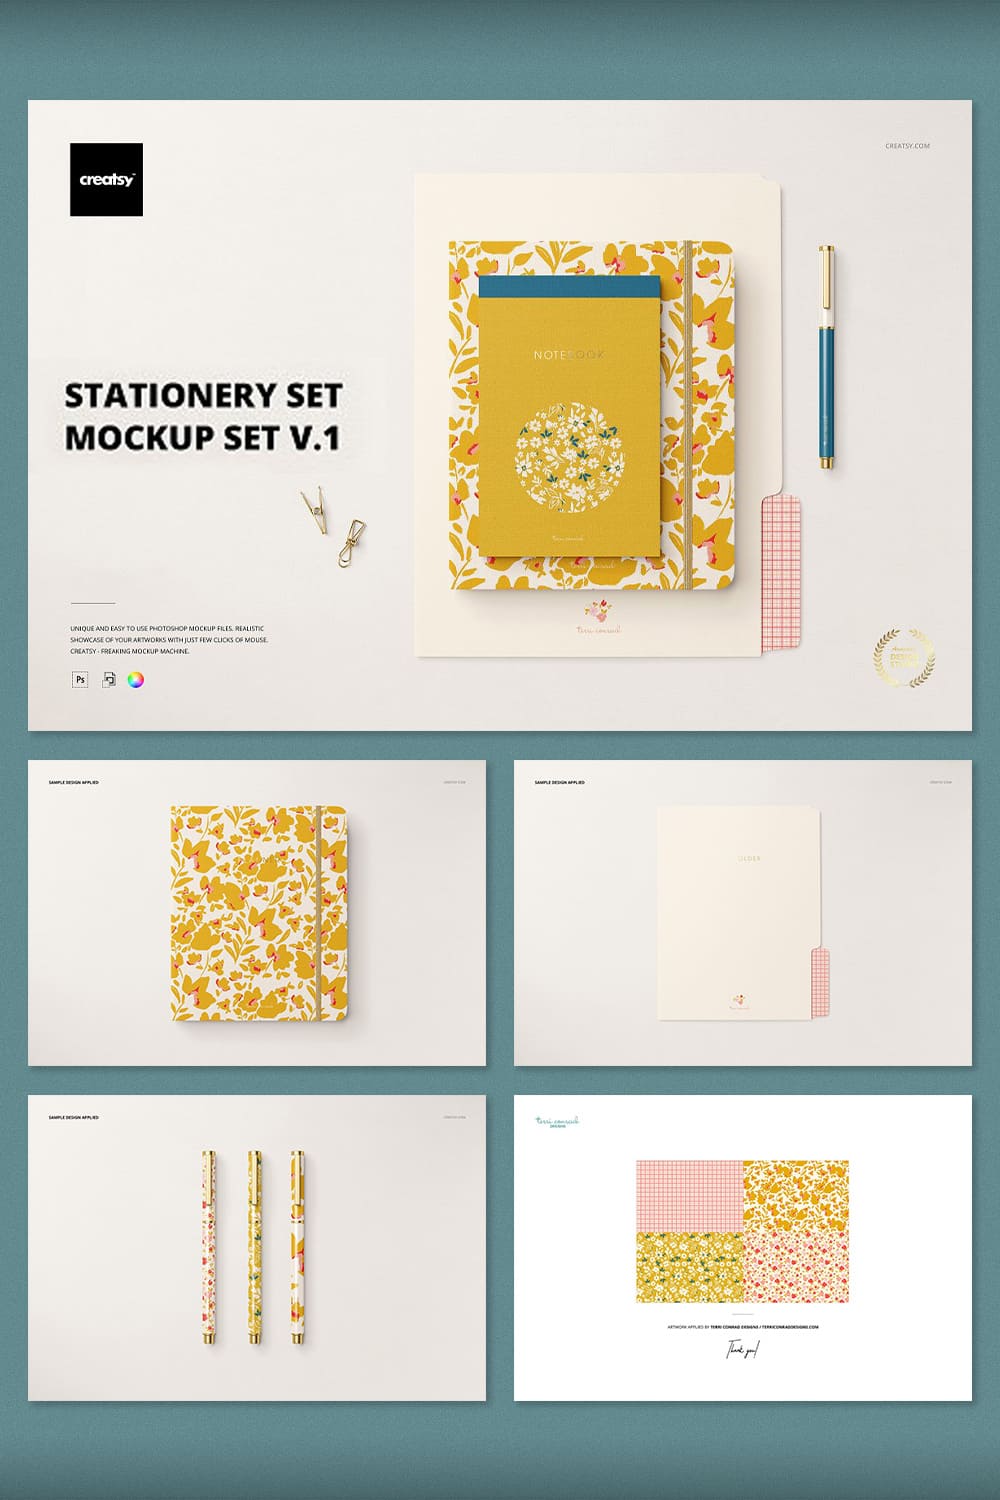 A selection of images of stationery with a wonderful design.